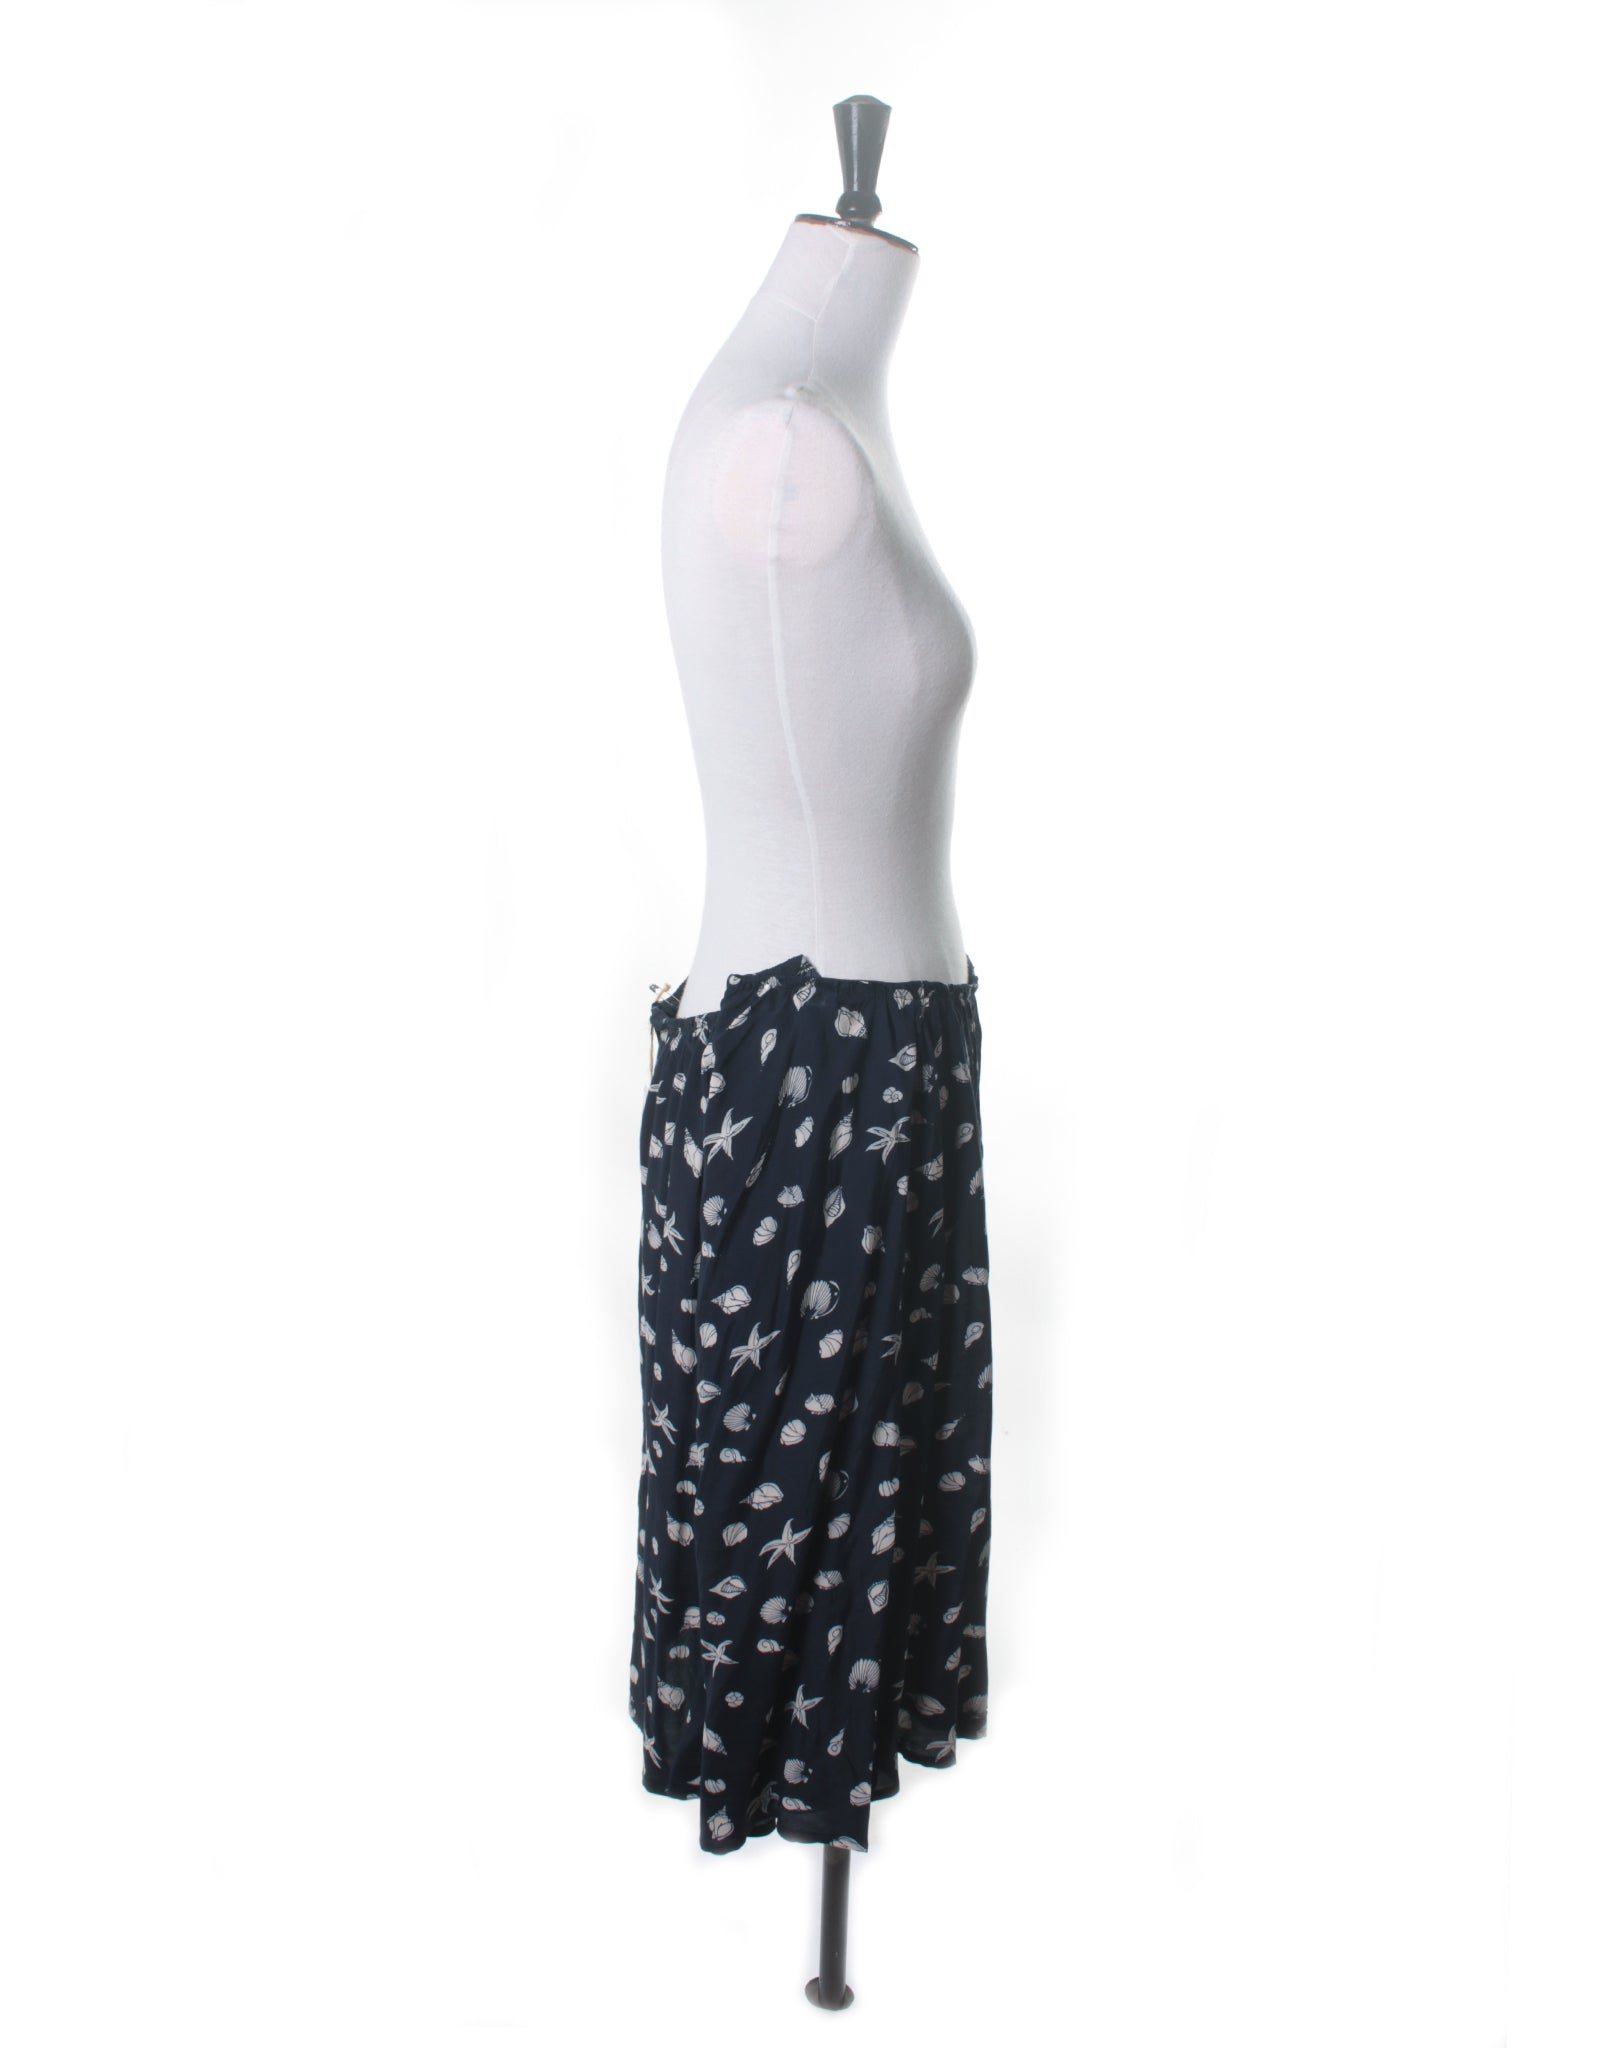 Vintage 80's Remade Navy Shell Skirt